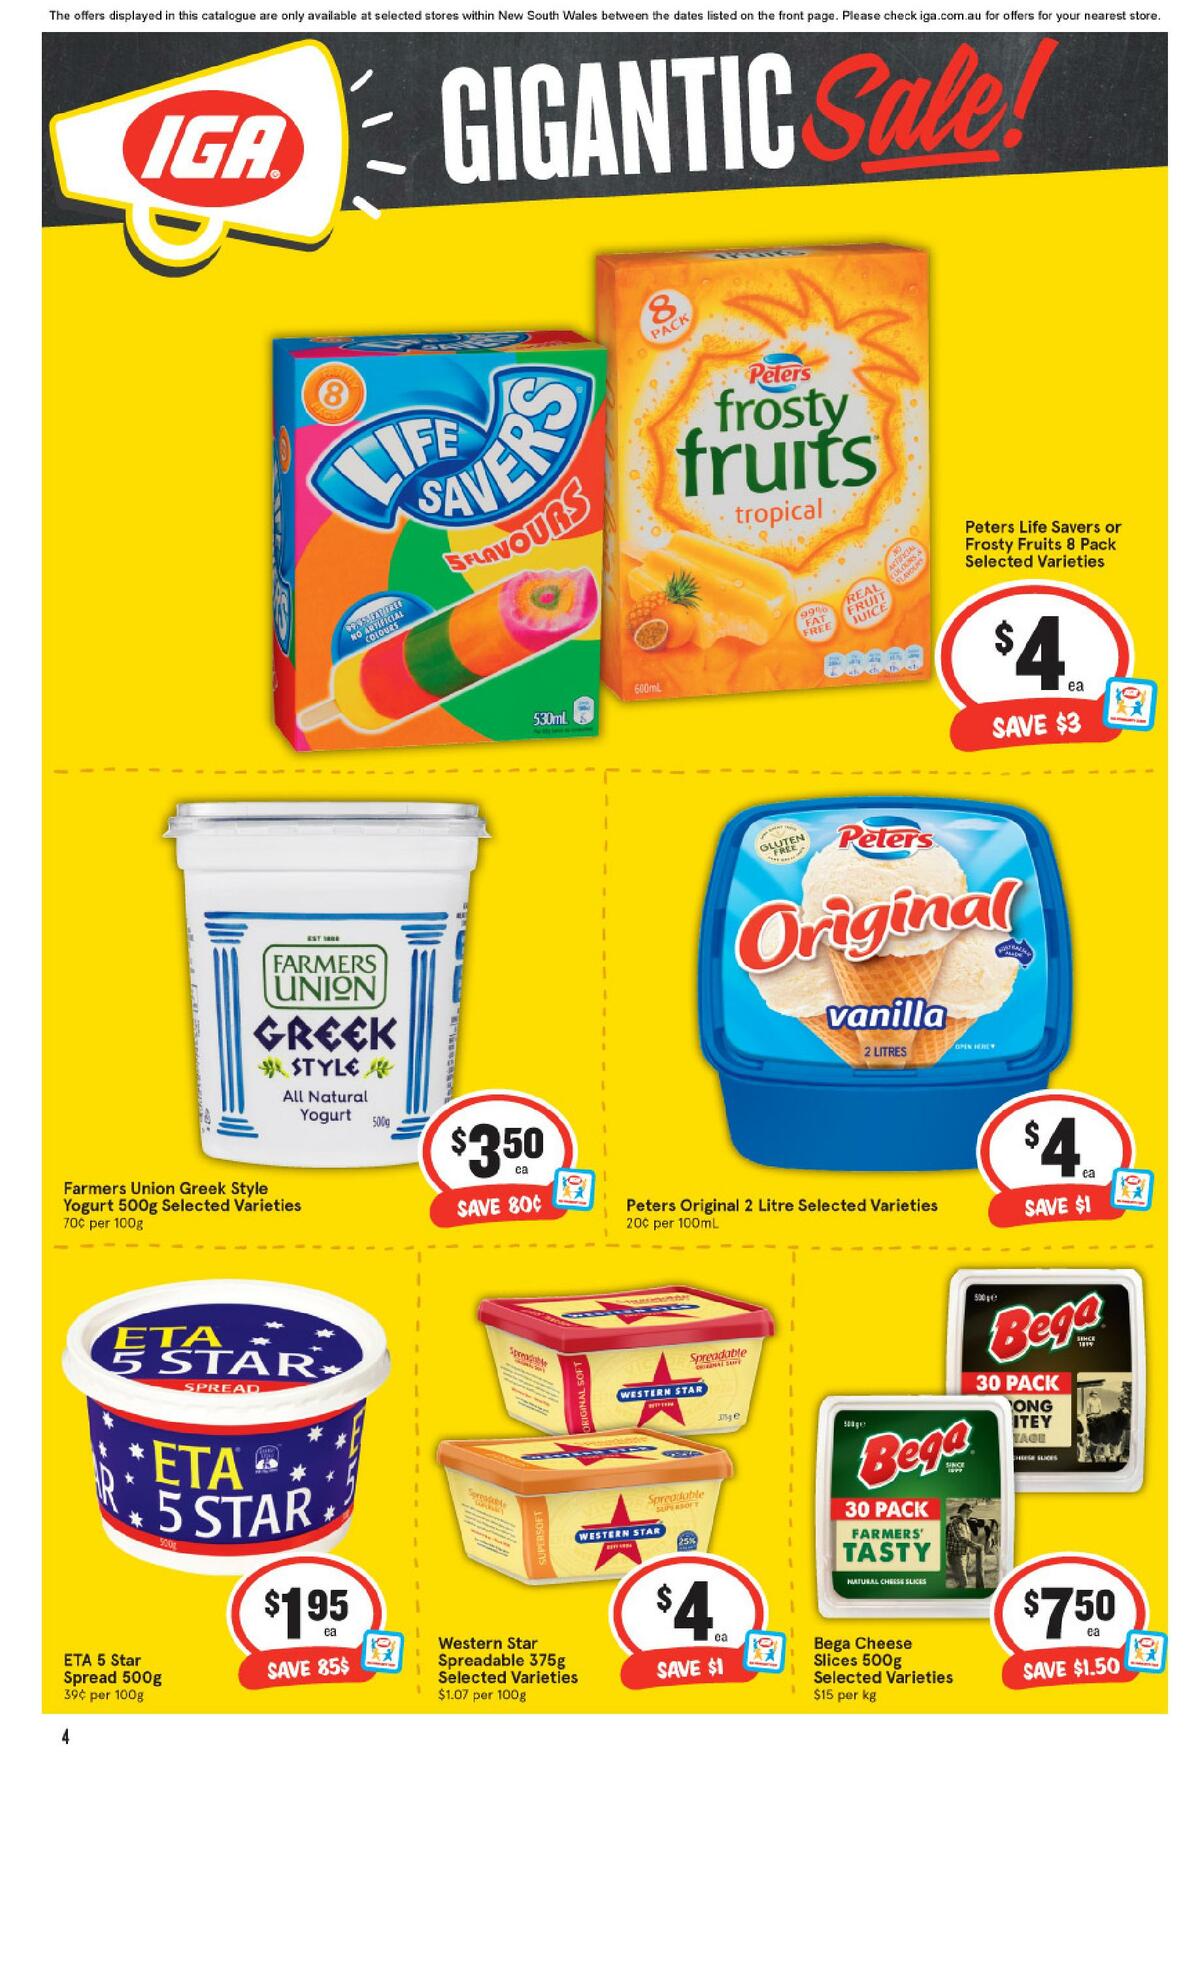 IGA Catalogues from 20 October